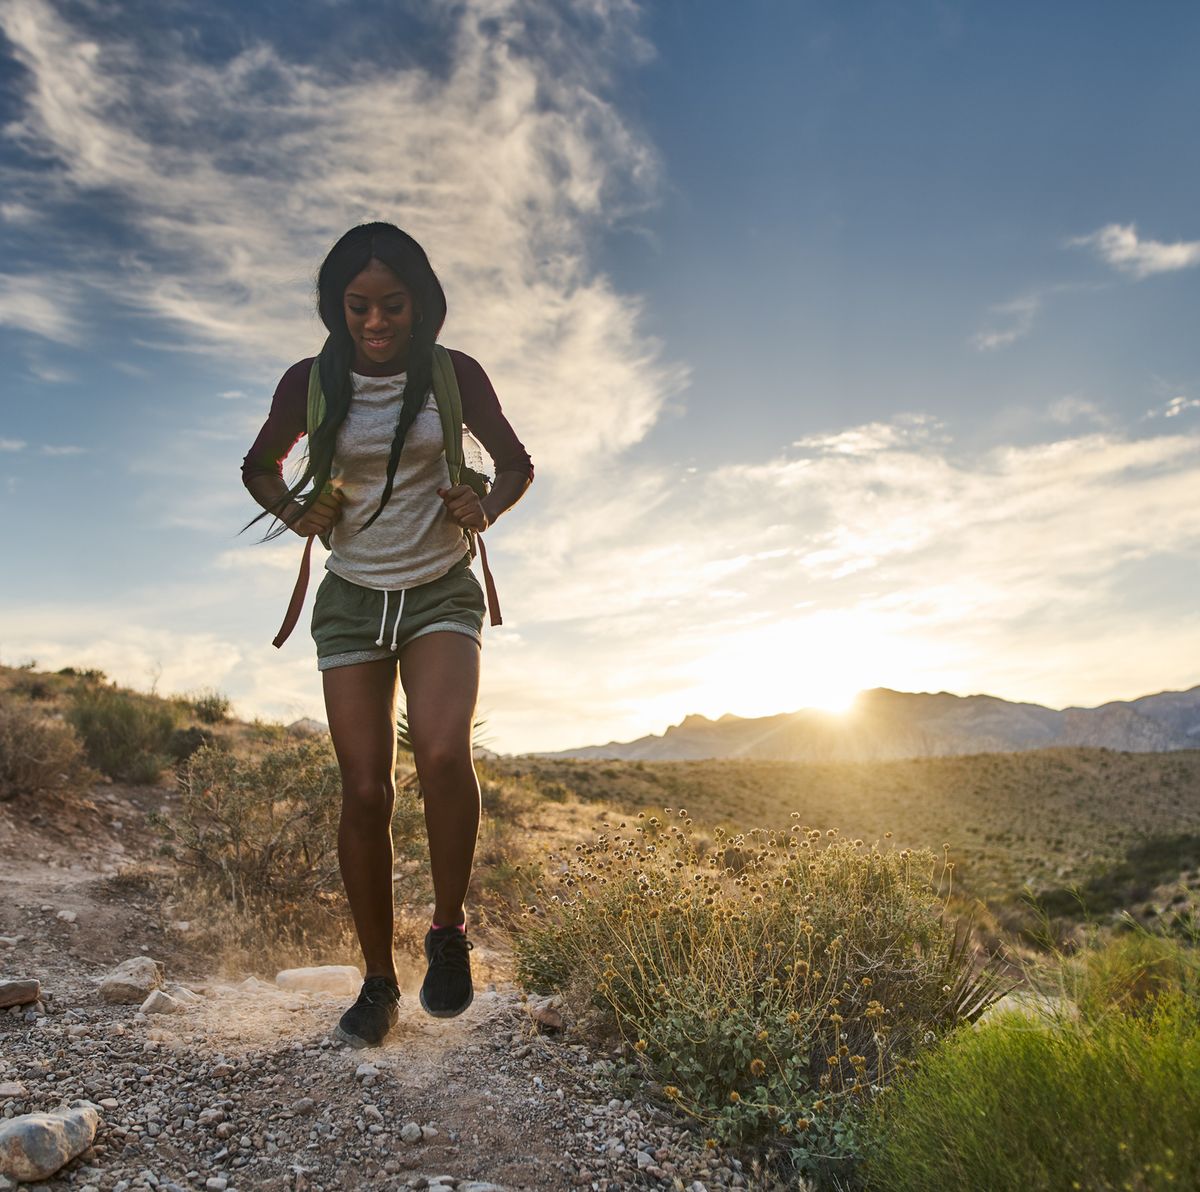 https://hips.hearstapps.com/hmg-prod/images/woman-hiking-at-red-rock-canyon-during-sunset-with-royalty-free-image-1601478369.jpg?crop=0.671xw:1.00xh;0.137xw,0&resize=1200:*